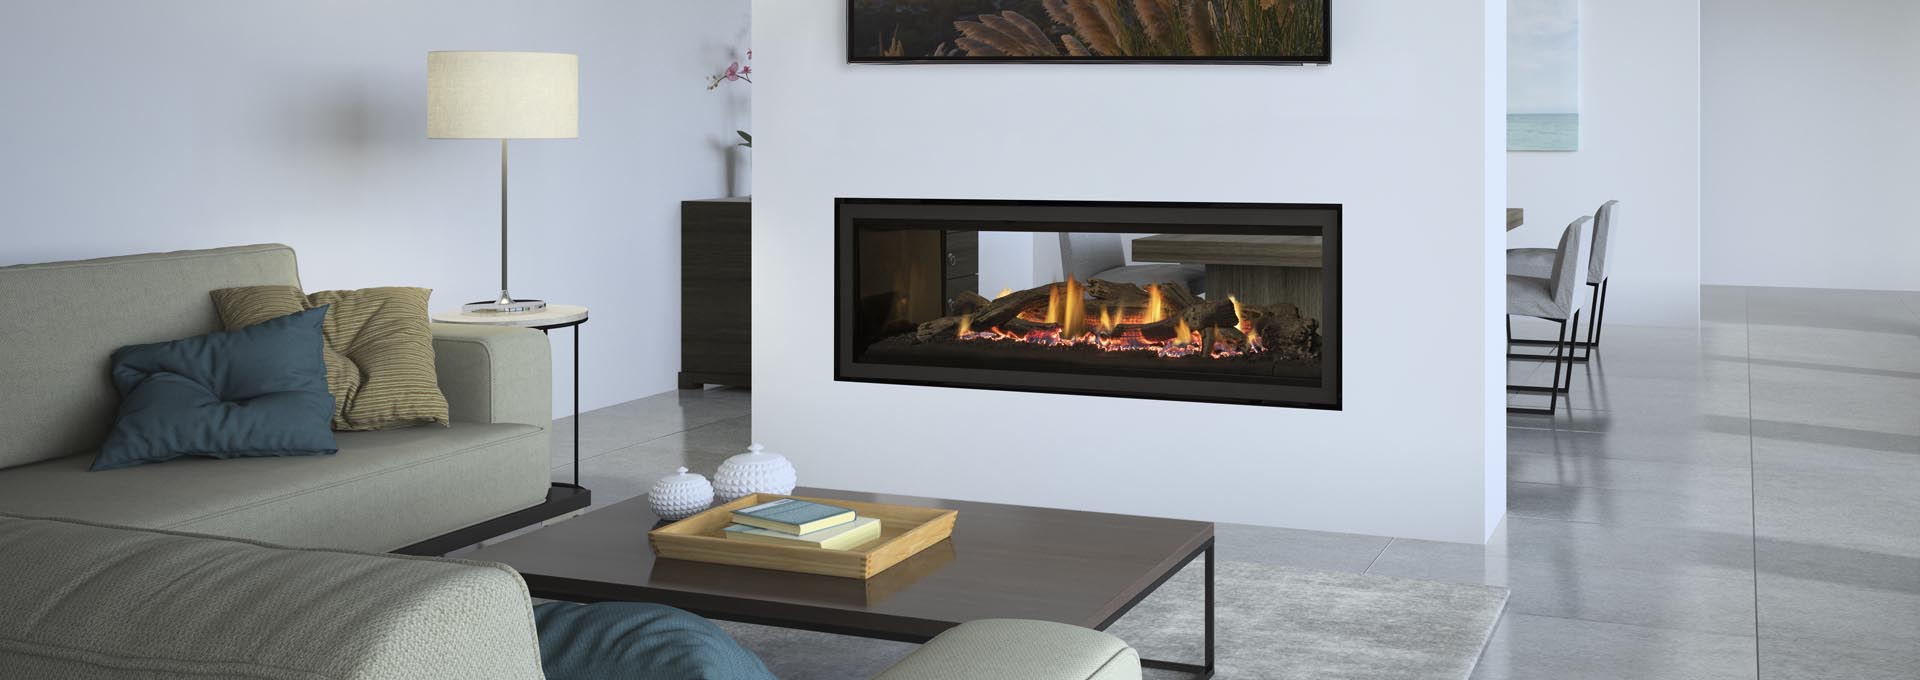 Top tips for fireplace renovation  